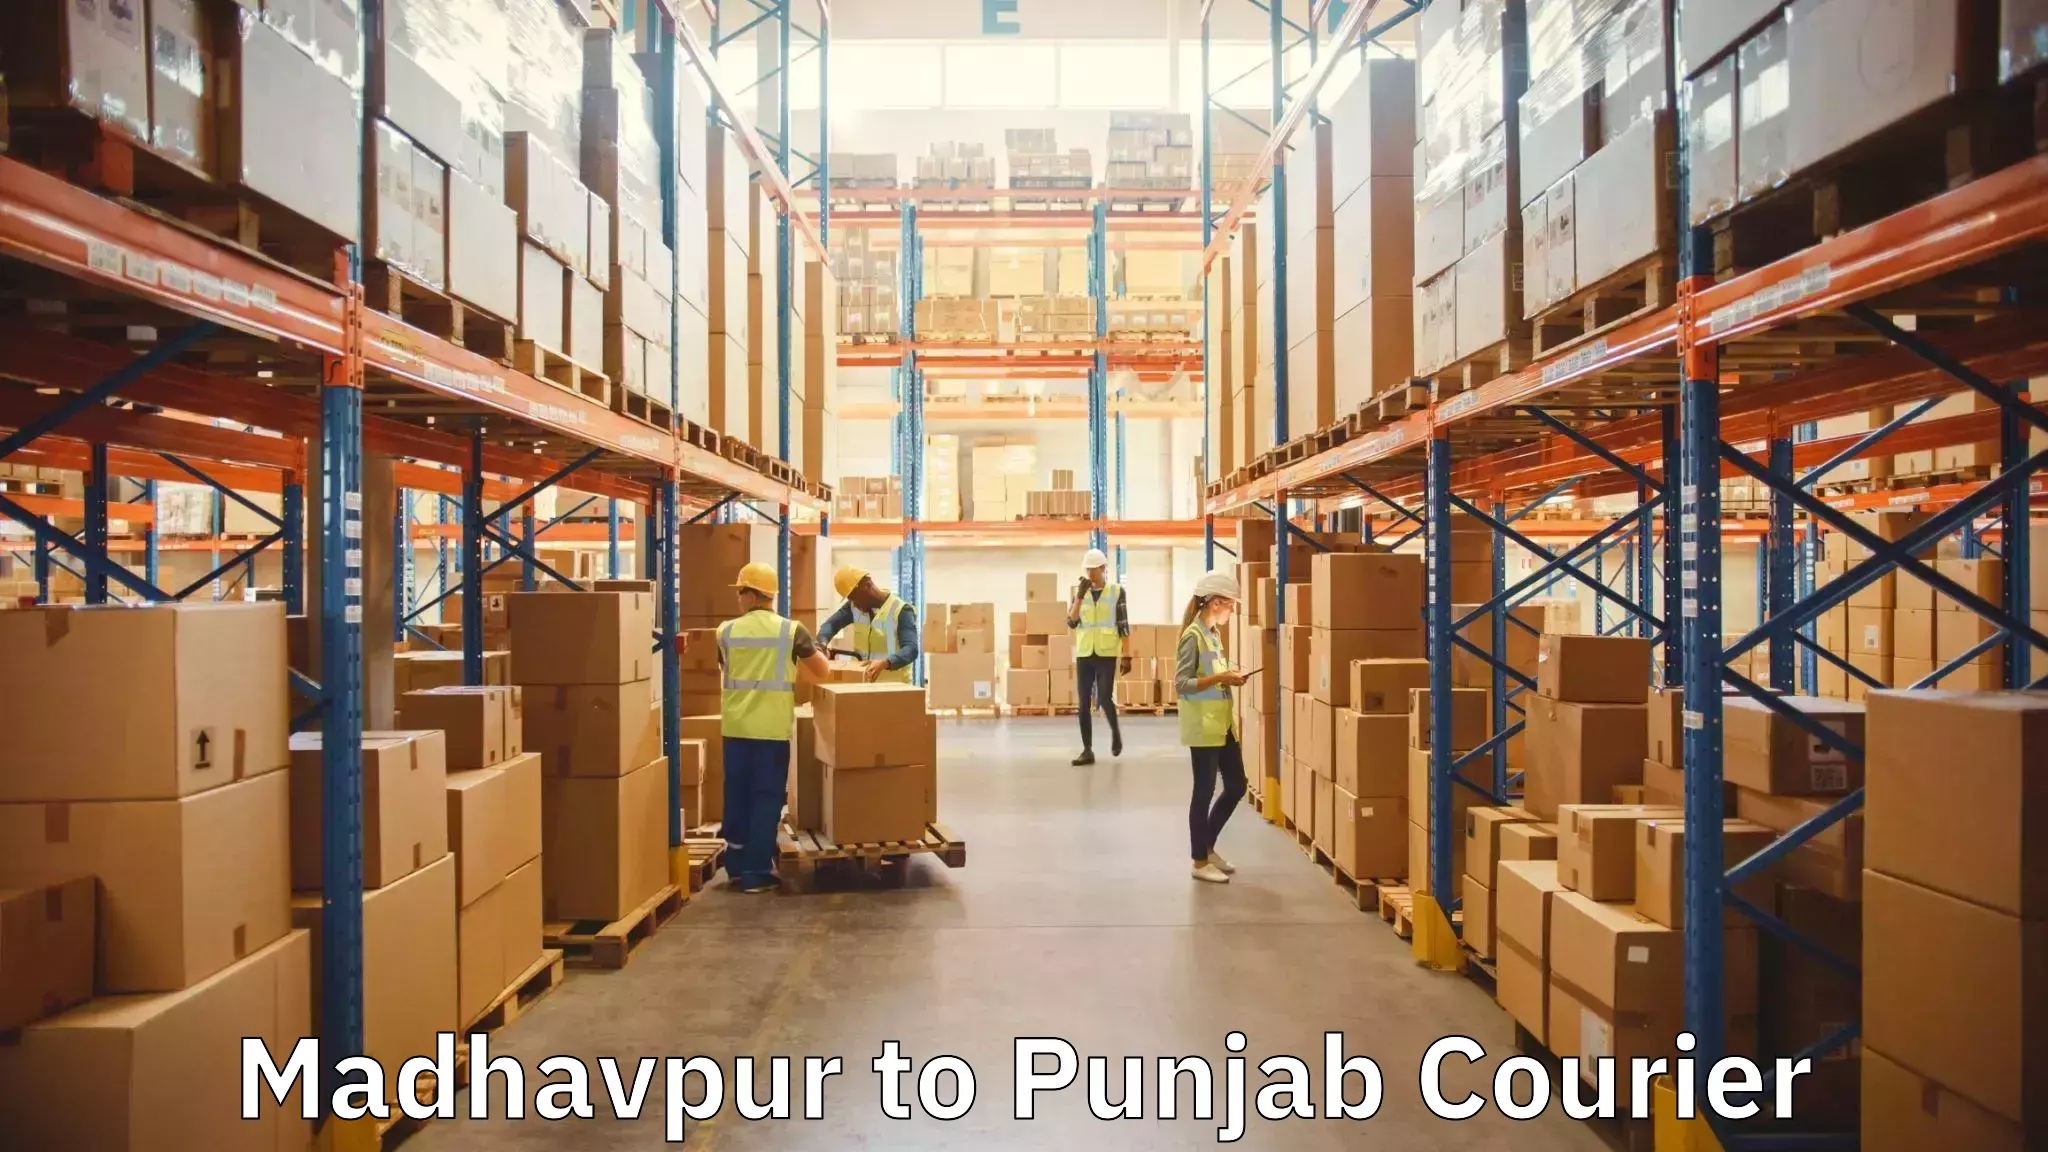 Quality moving company in Madhavpur to Ajnala